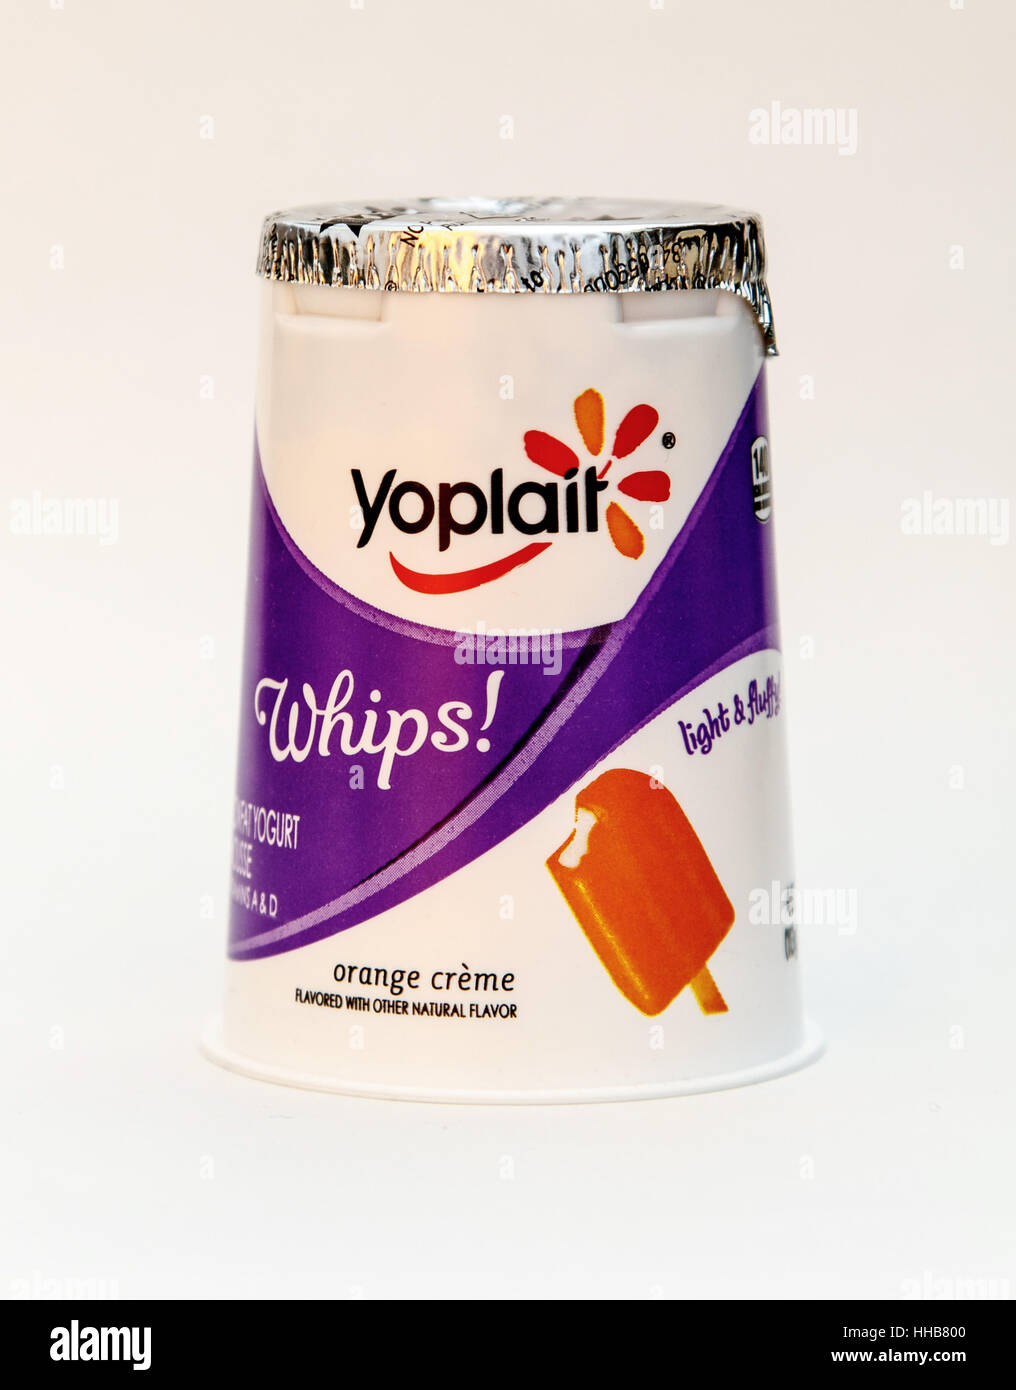 An orange creme flavored Yoplait whipped yogurt is seen against white background. Stock Photo